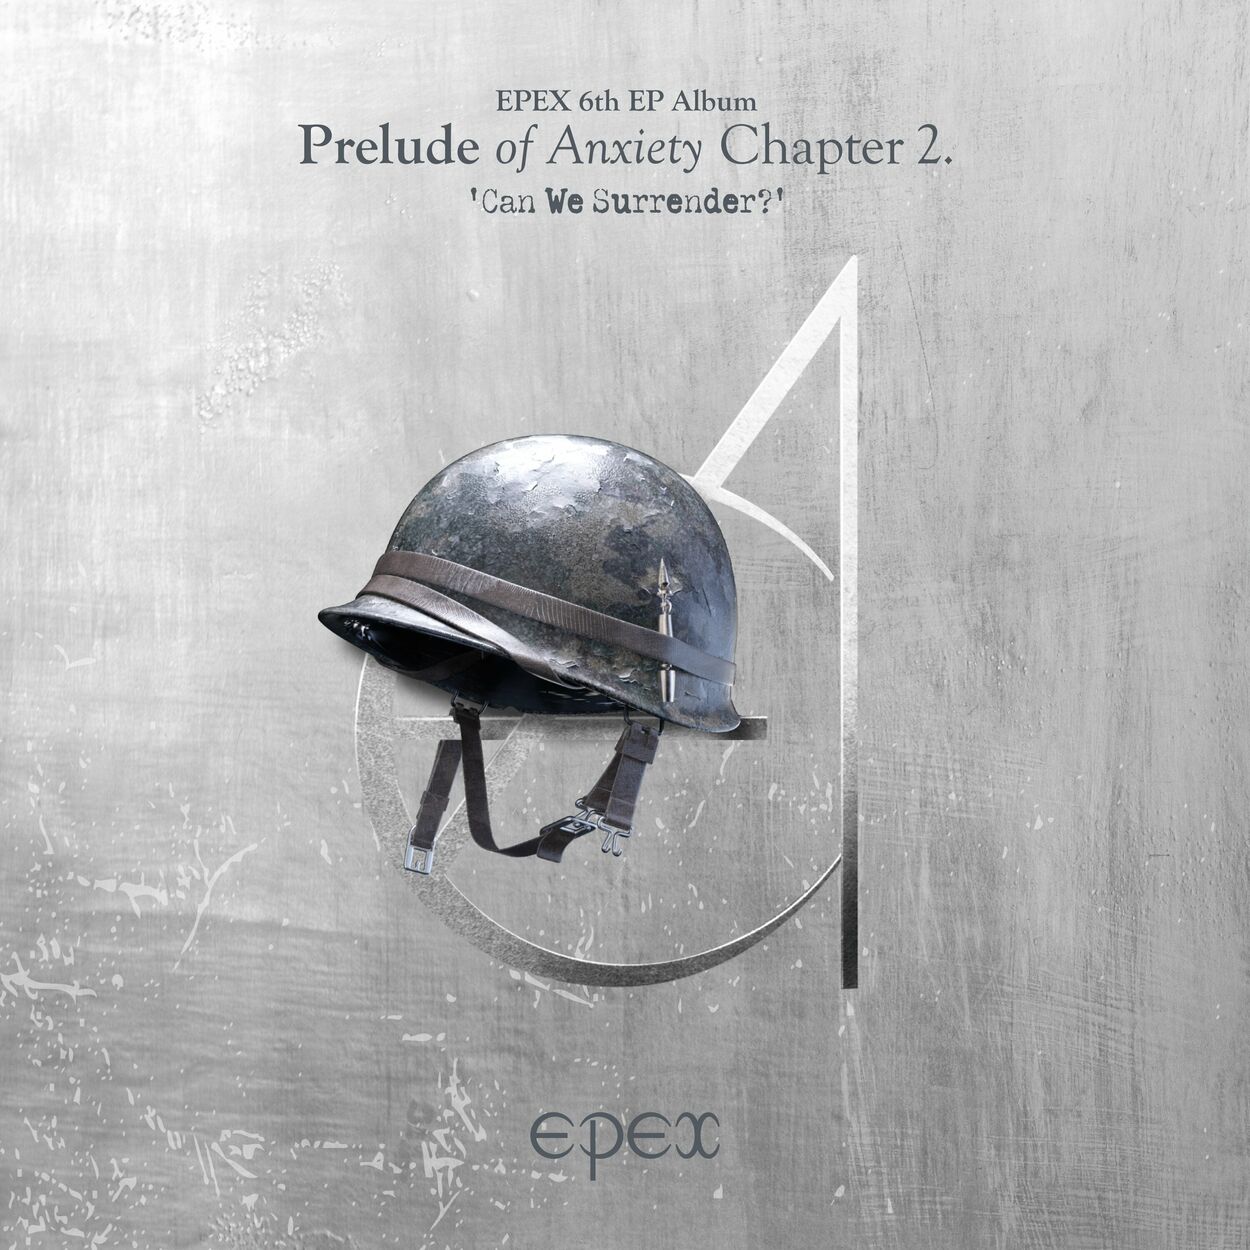 EPEX – EPEX 6th EP Album Prelude of Anxiety Chapter 2. ‘Can We Surrender?’ – EP